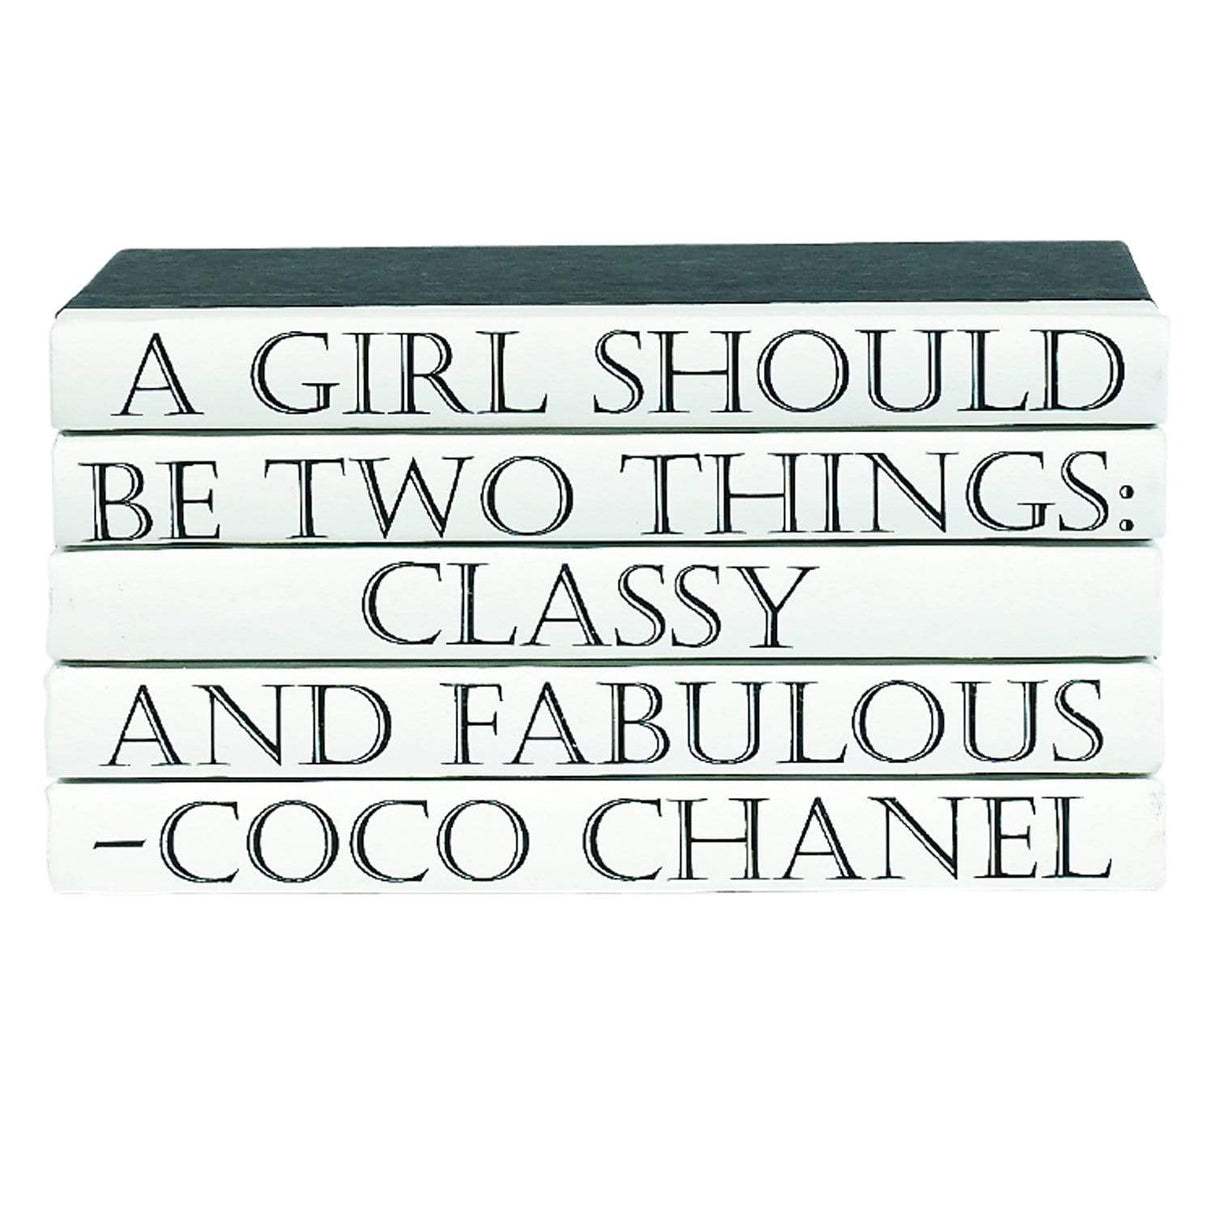 BLU BOOKS - Quotations Series: Coco Chanel / "A Girl Should Be..." Decor E-Lawrence-QUOTES-05/COCO